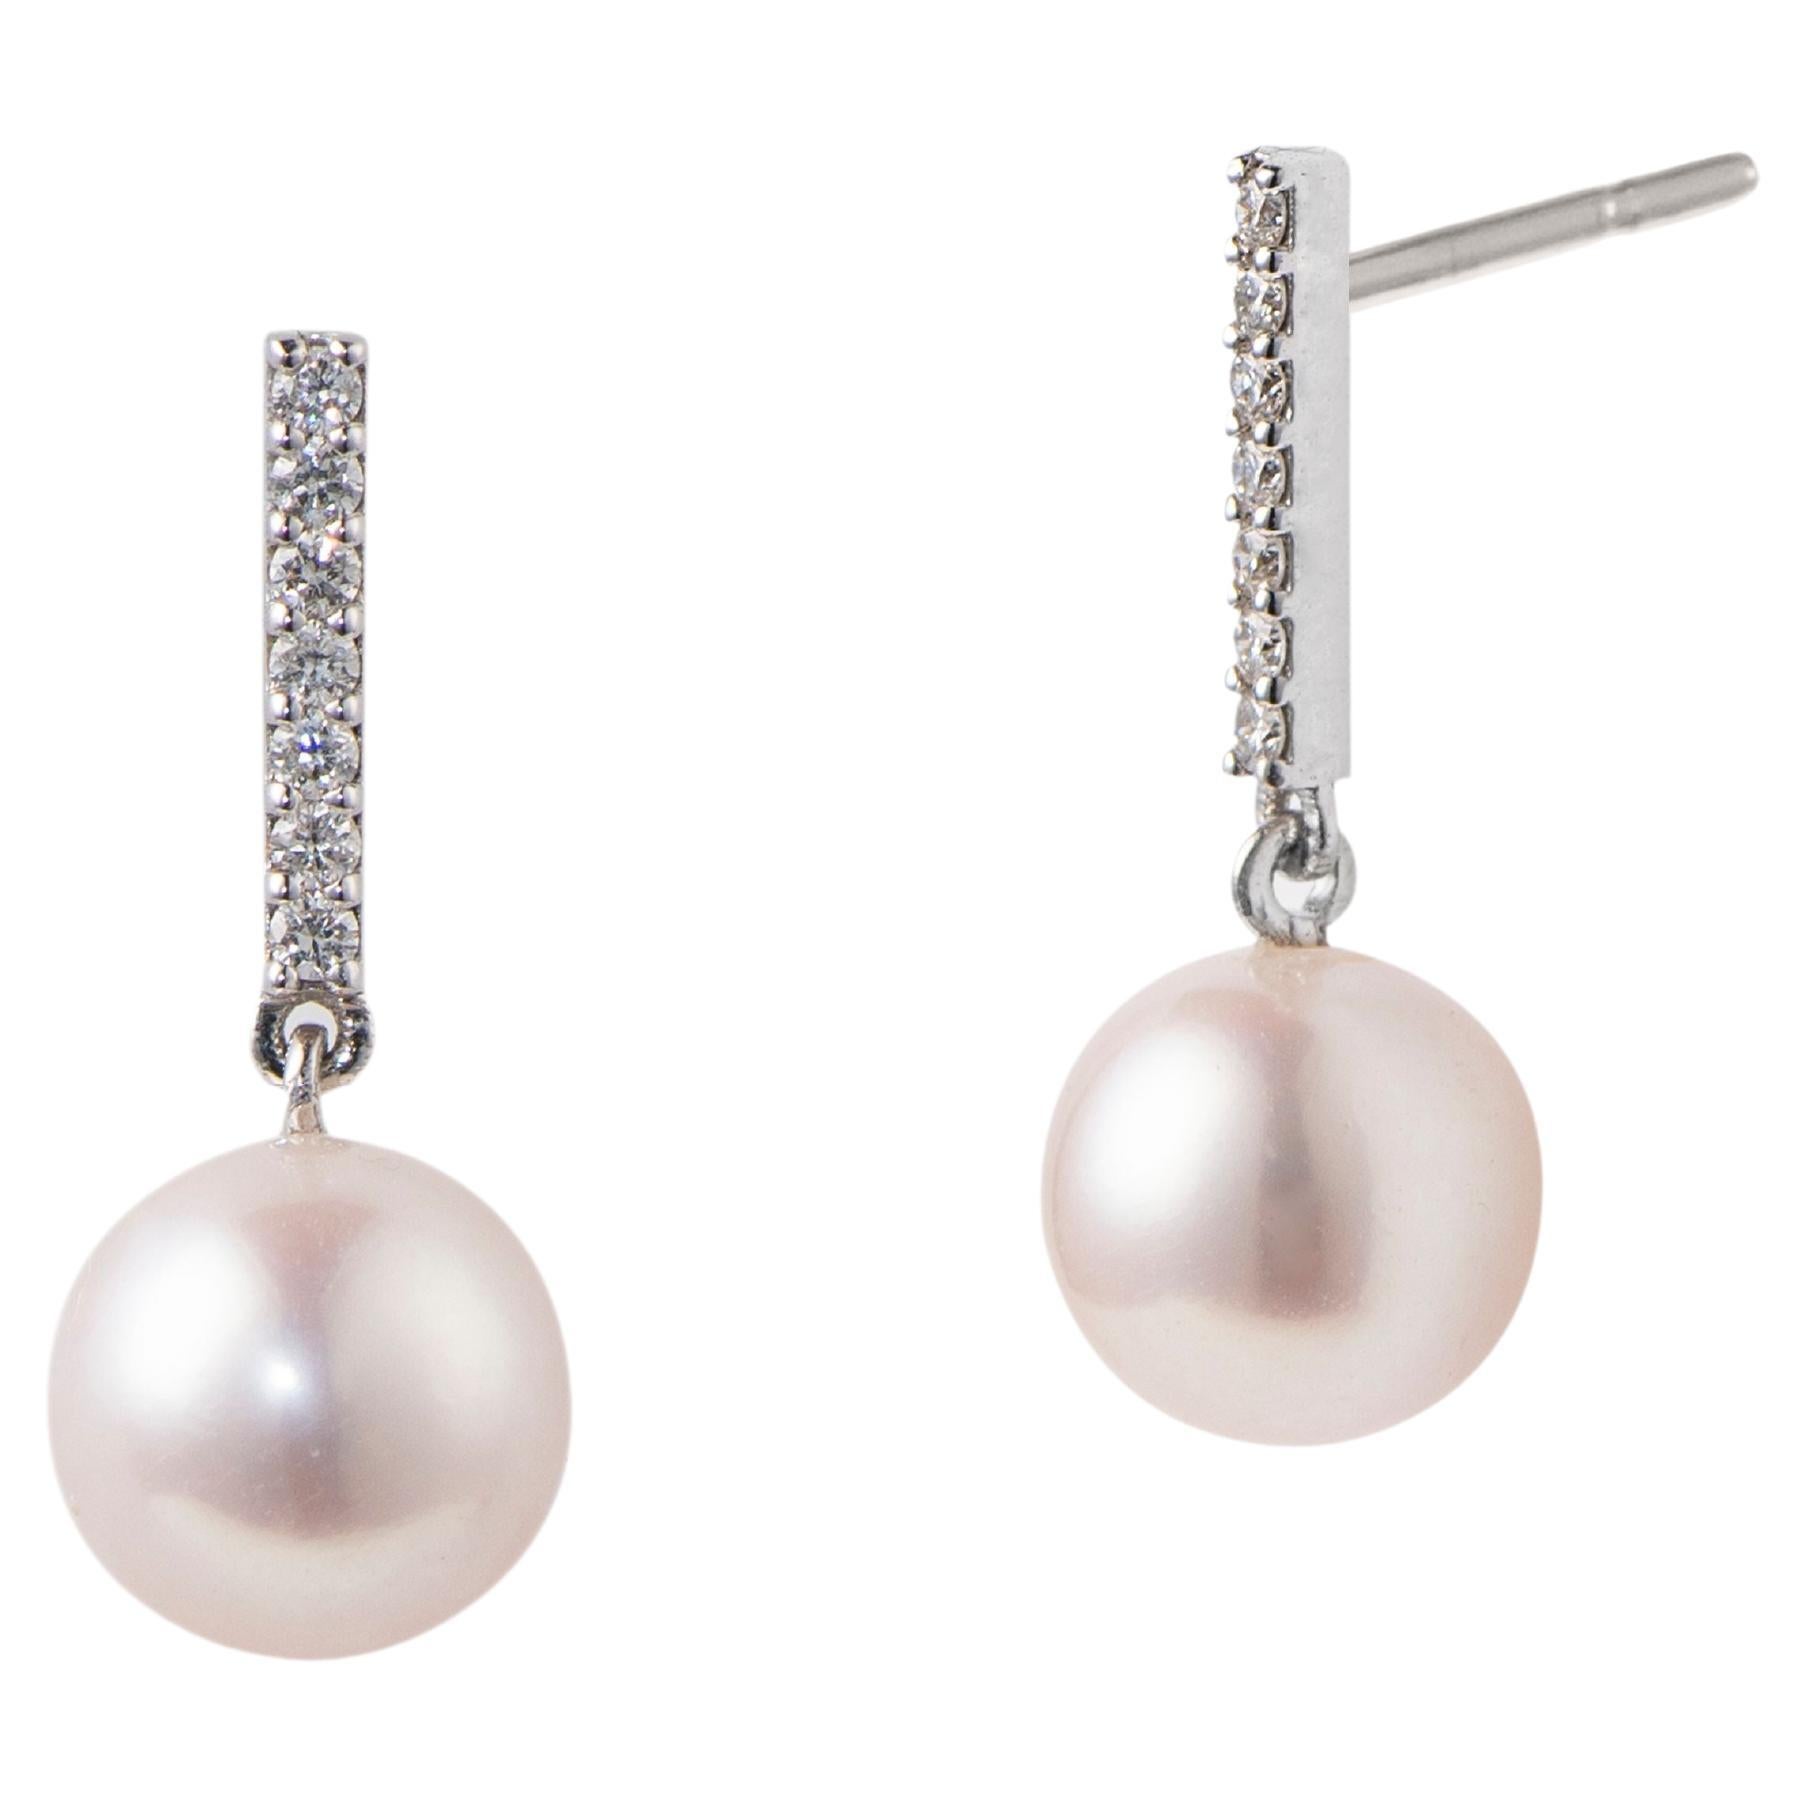 Diamond Bar earrings with Pearls, 0.15ctw Diamonds 18K Gold For Sale